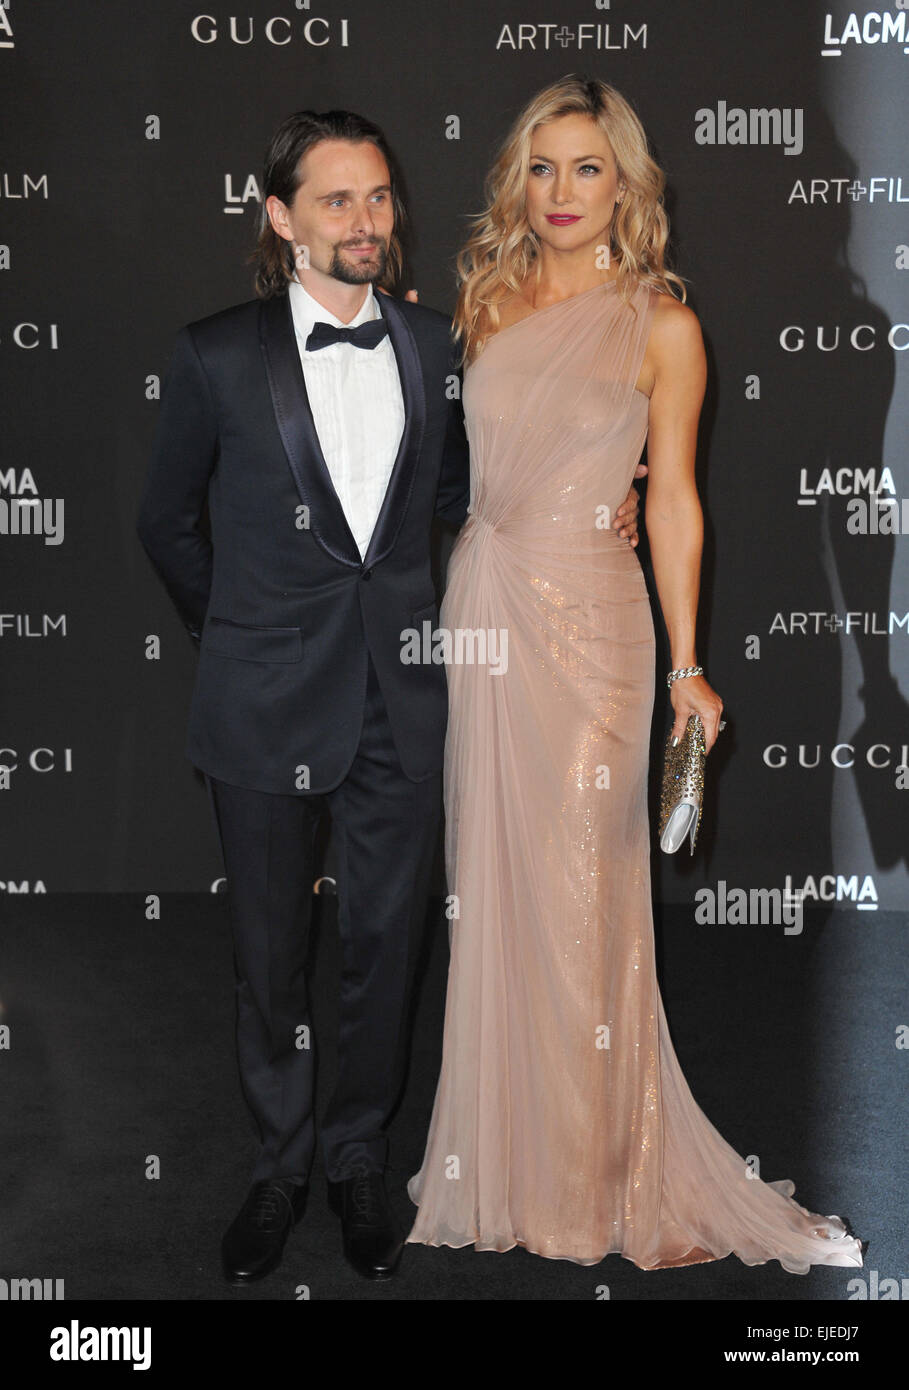 LOS ANGELES, CA - NOVEMBER 1, 2014: Kate Hudson & fiancé Matthew Bellamy at the 2014 LACMA Art+Film Gala at the Los Angeles County Museum of Art. Stock Photo